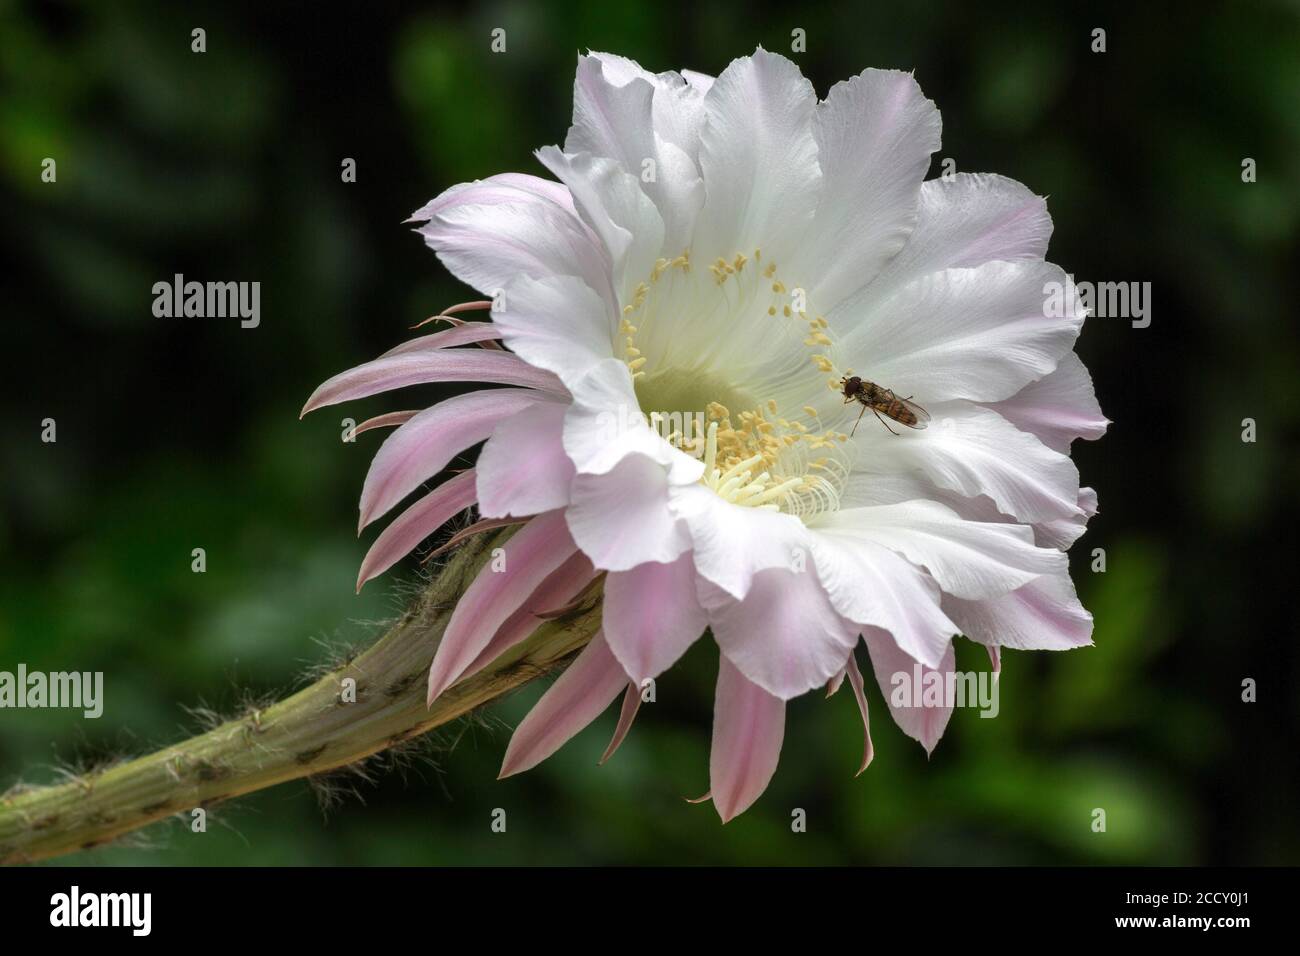 Cactus flower, white, pink, flowering cactus (Echinopsis sp.), with Hoverfly (Syrphidae), Baden-Wuerttemberg, Germany Stock Photo